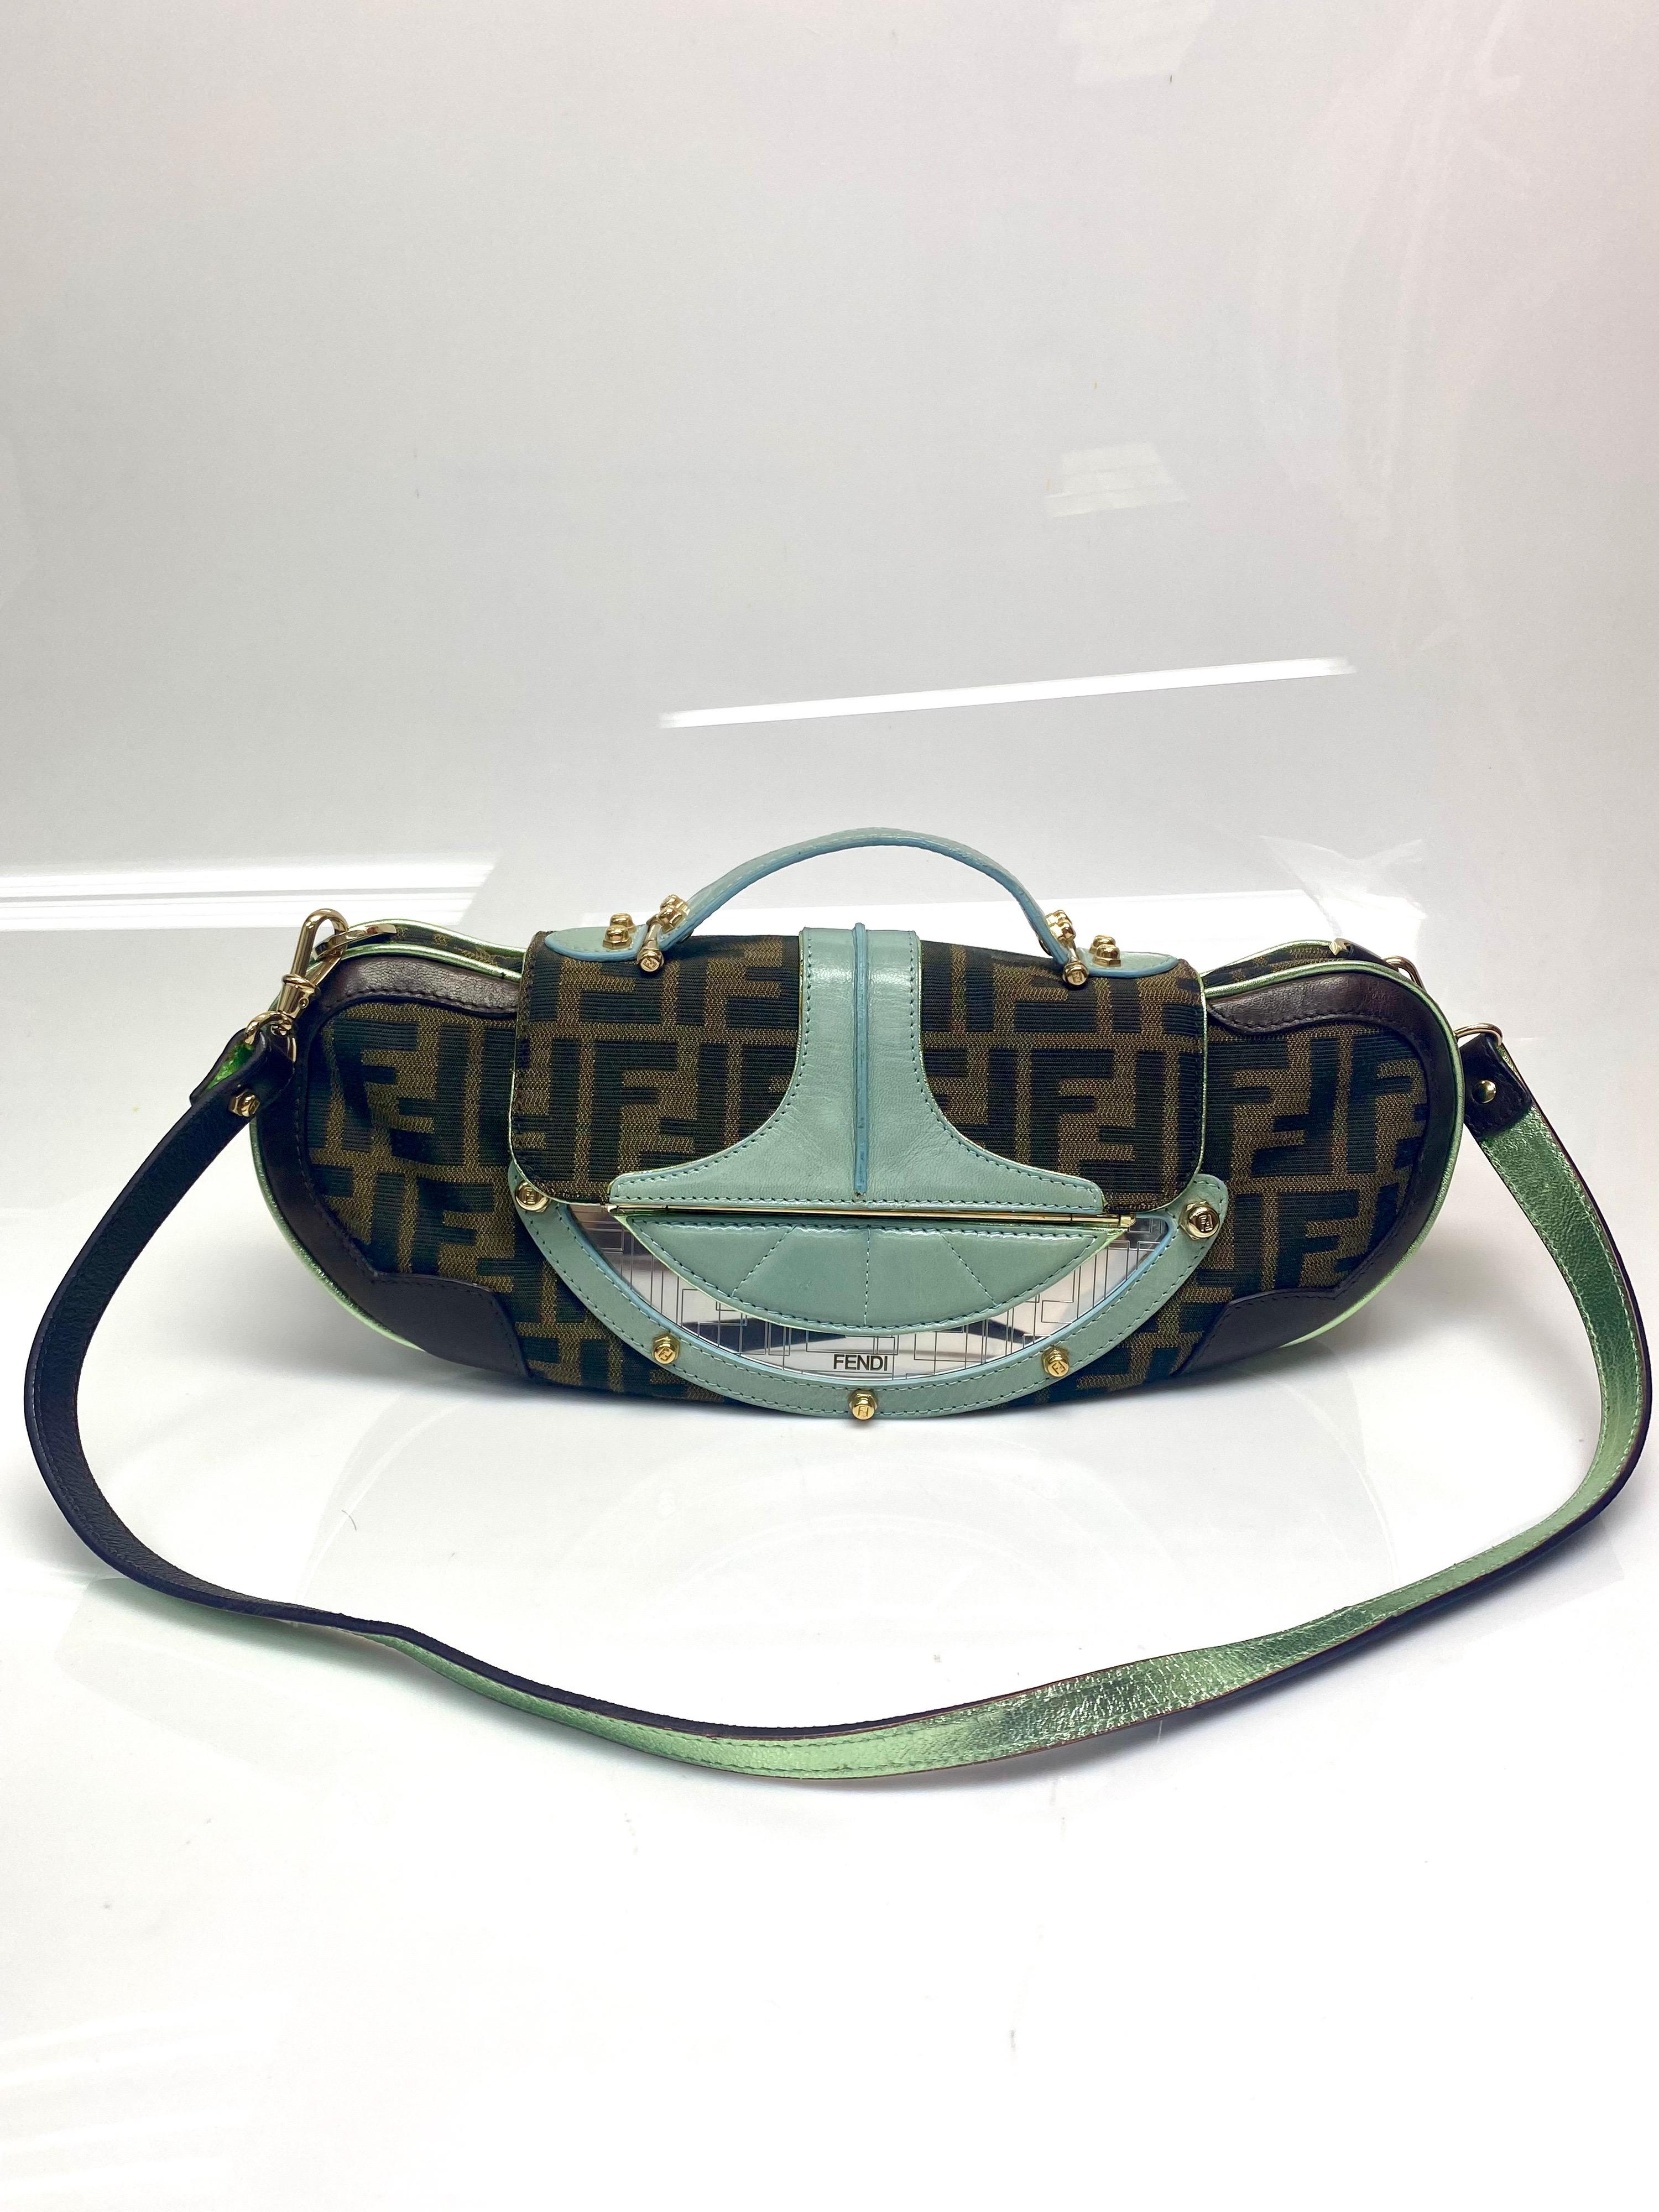 Fendi Canvas Vanity Mirror Clutch Handbag. This beautiful eccentric bag from Fendi is a classic piece with a twist. Featuring the Fendi canvas and hues of Aqua and browns. The bag can be used as a clutch or a handbag with the removable/reversable